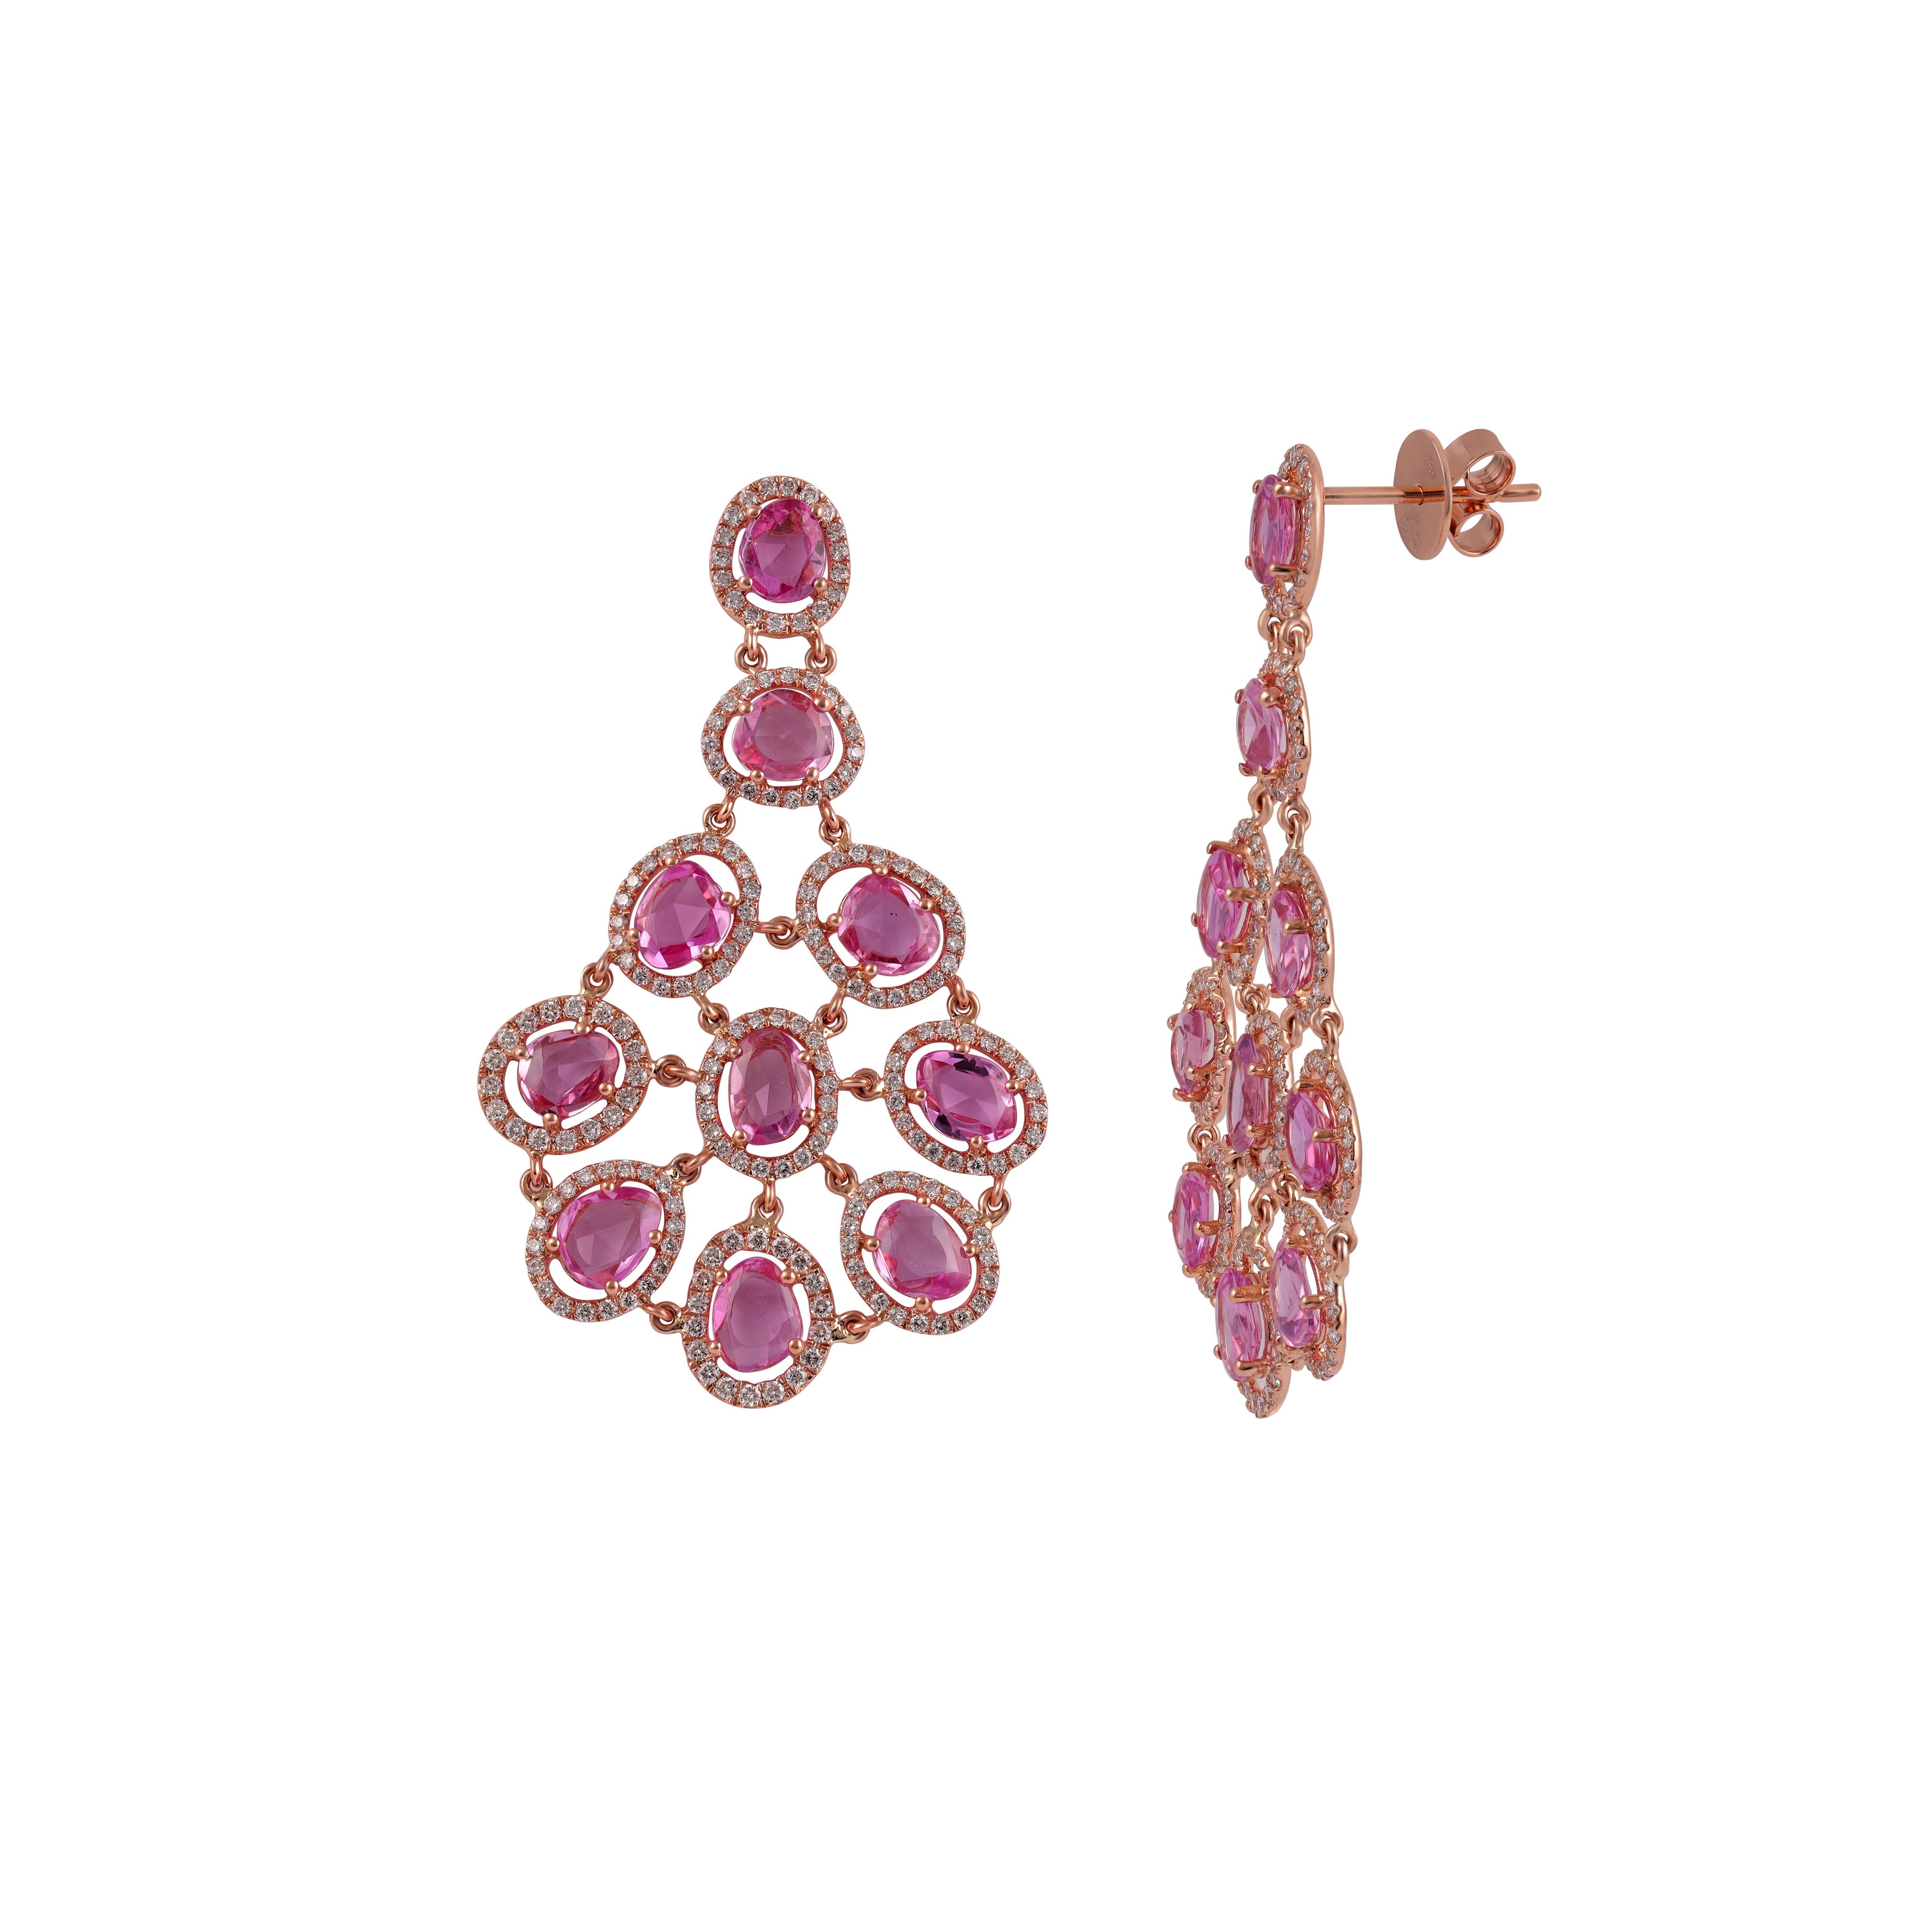 10.68 Carat Pink Sapphire & Diamonds Long Earrings in 18k Gold In New Condition For Sale In Jaipur, Rajasthan